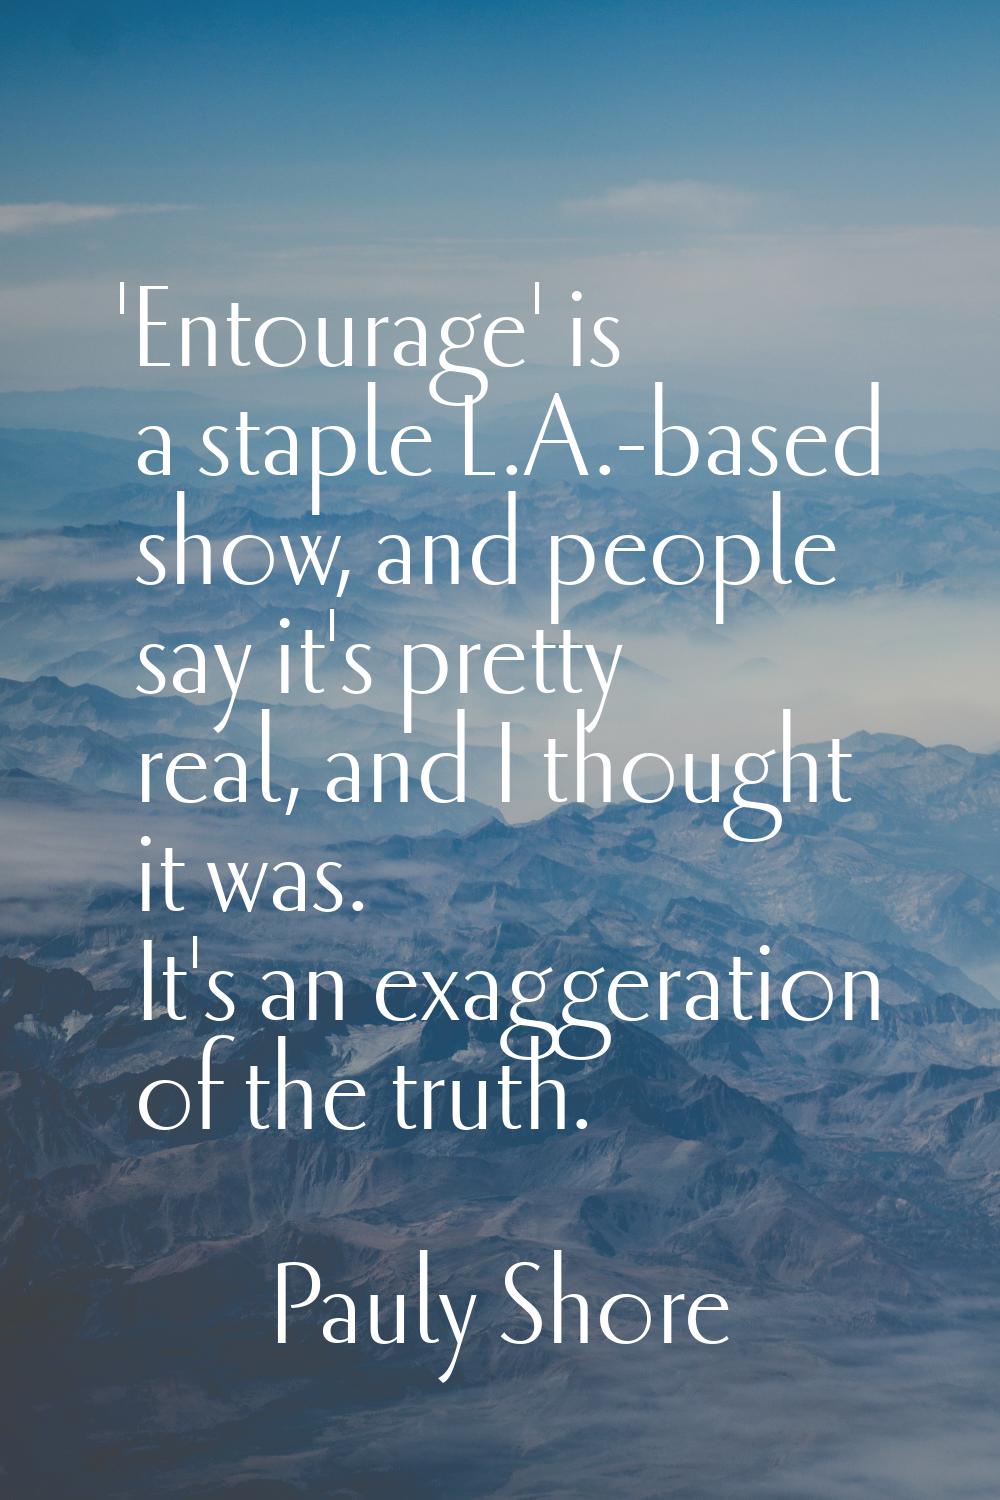 'Entourage' is a staple L.A.-based show, and people say it's pretty real, and I thought it was. It'